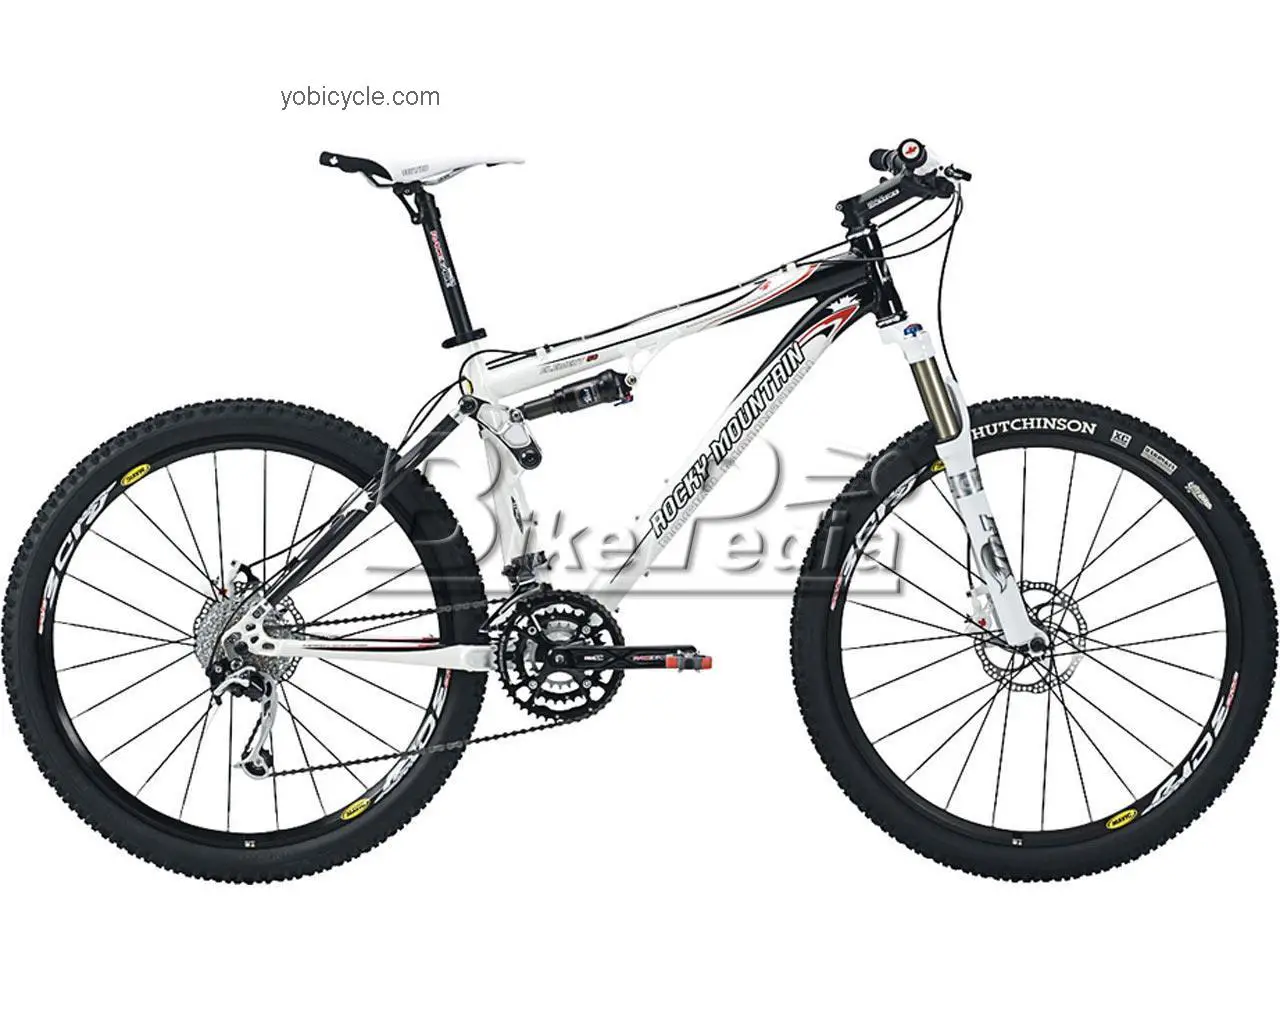 Rocky Mountain Element 50 2009 comparison online with competitors